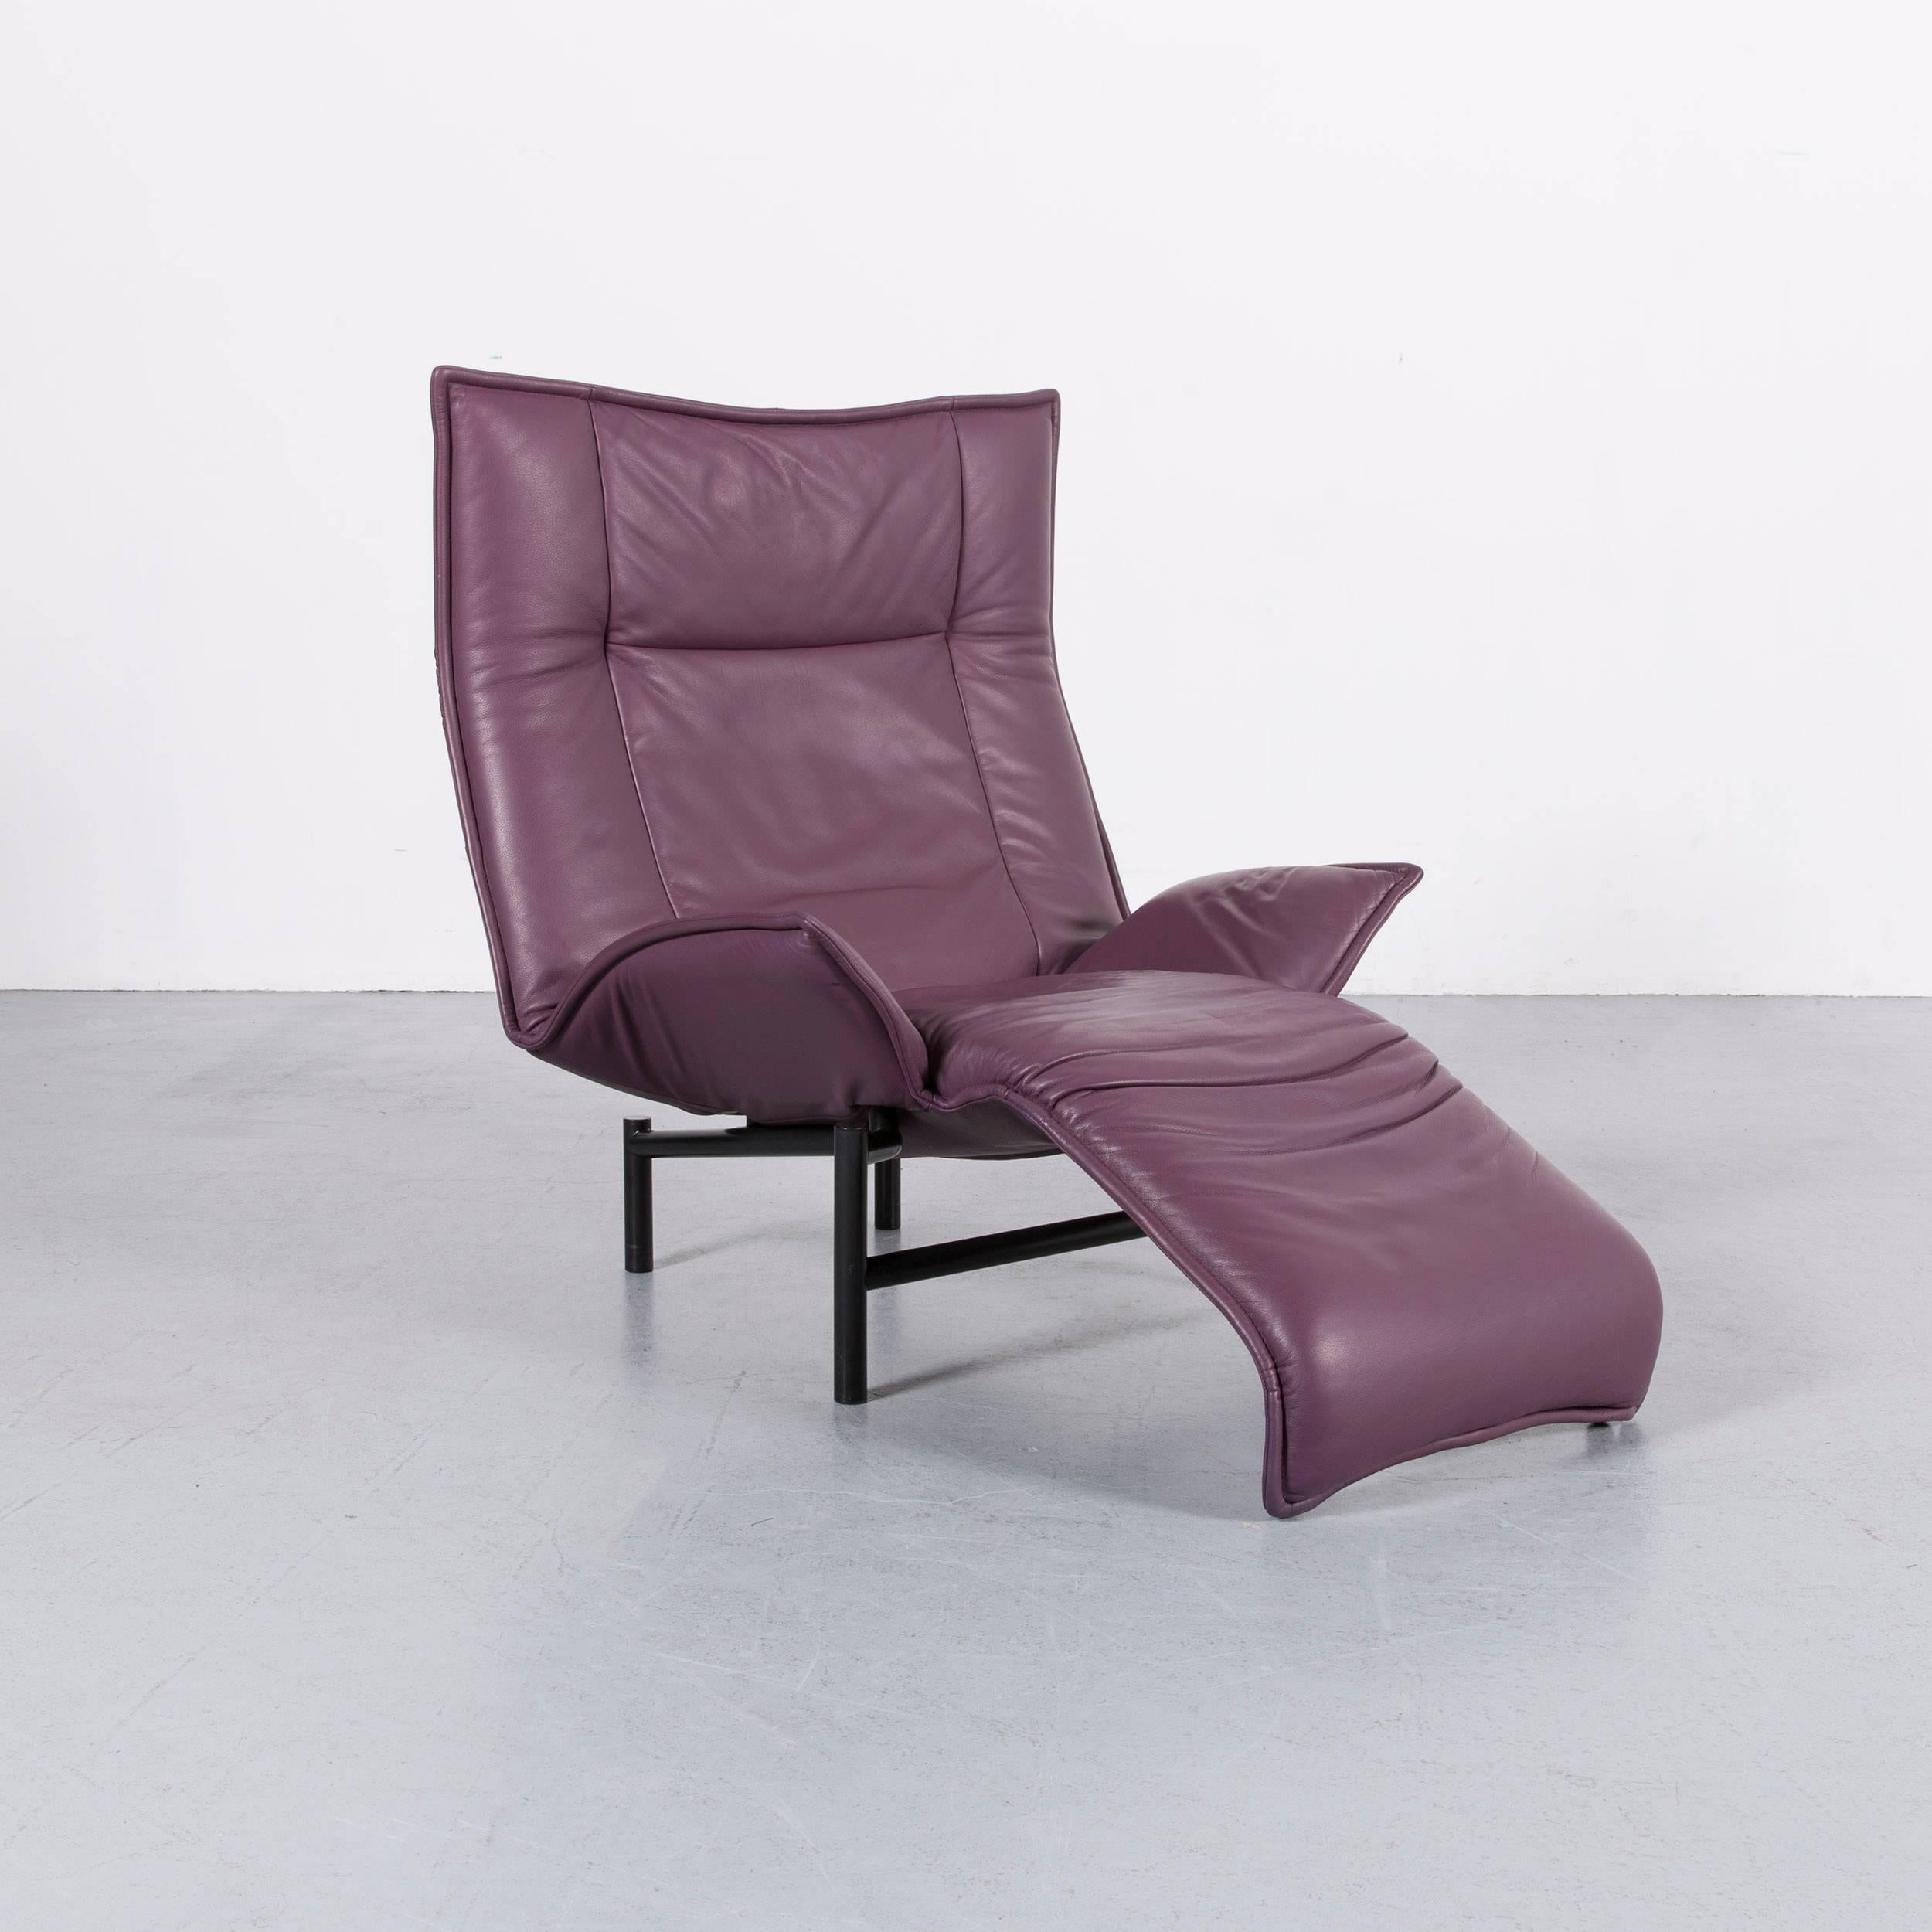 We bring to you an Cassina Veranda designer leather armchair in purple with recliner function.